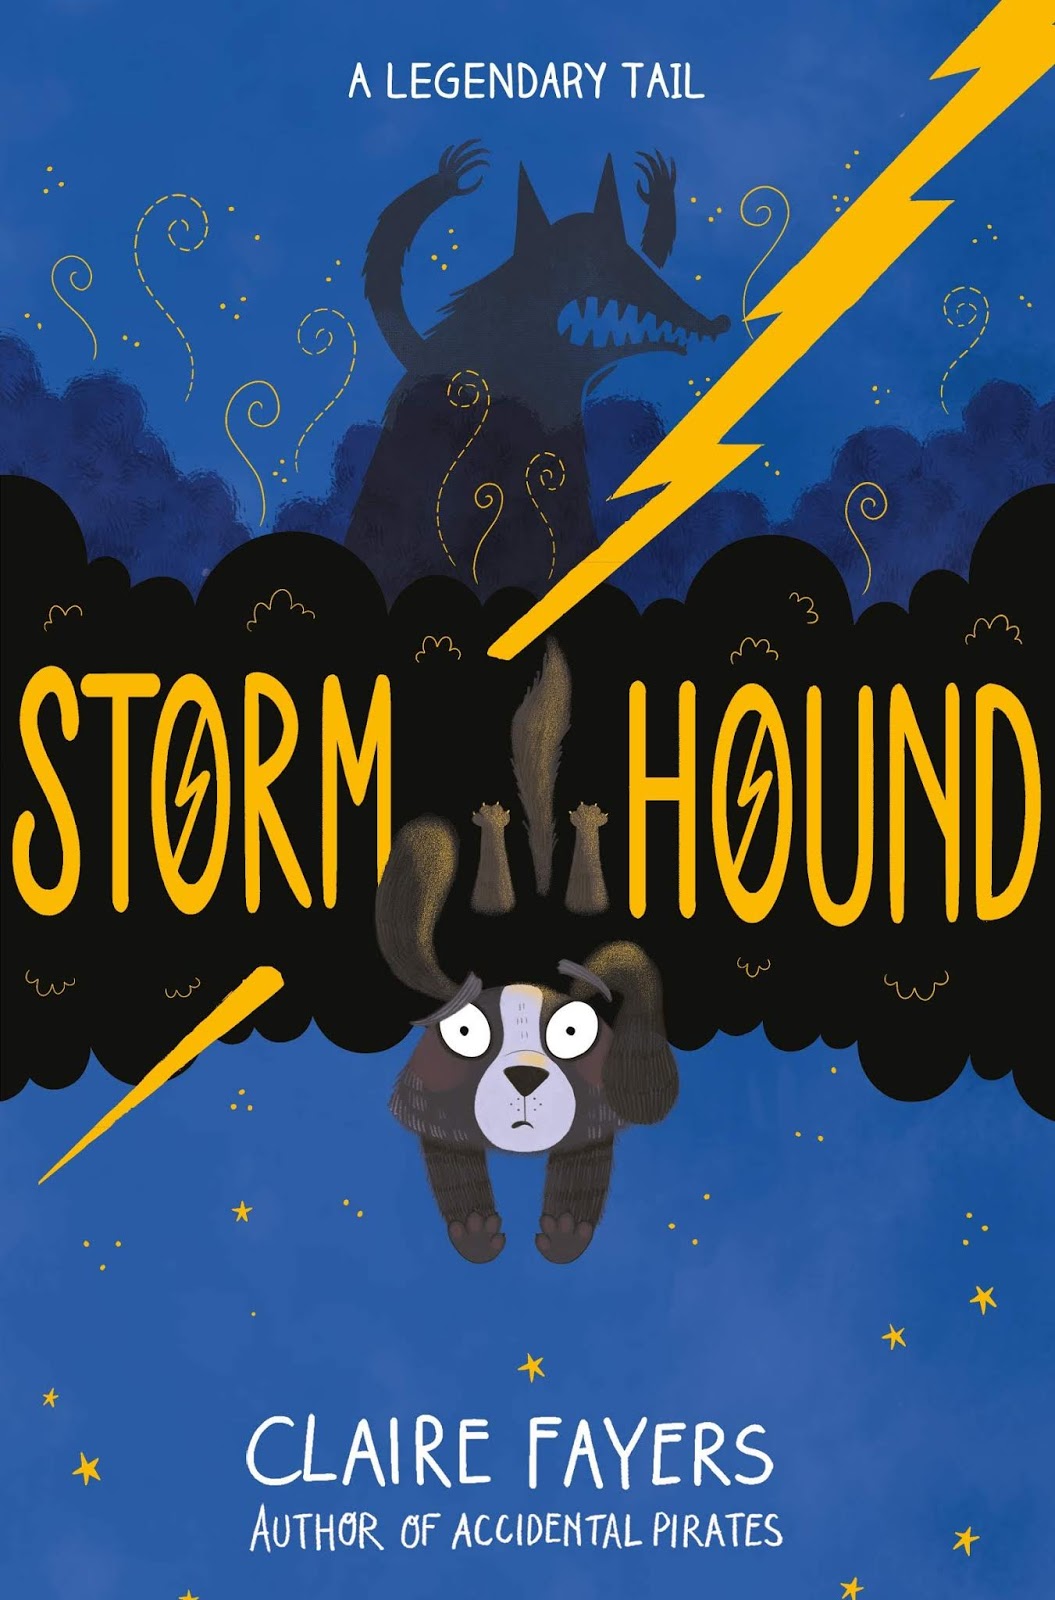 Mr Ripleys Enchanted Books: Claire Fayers - Storm Hound ...